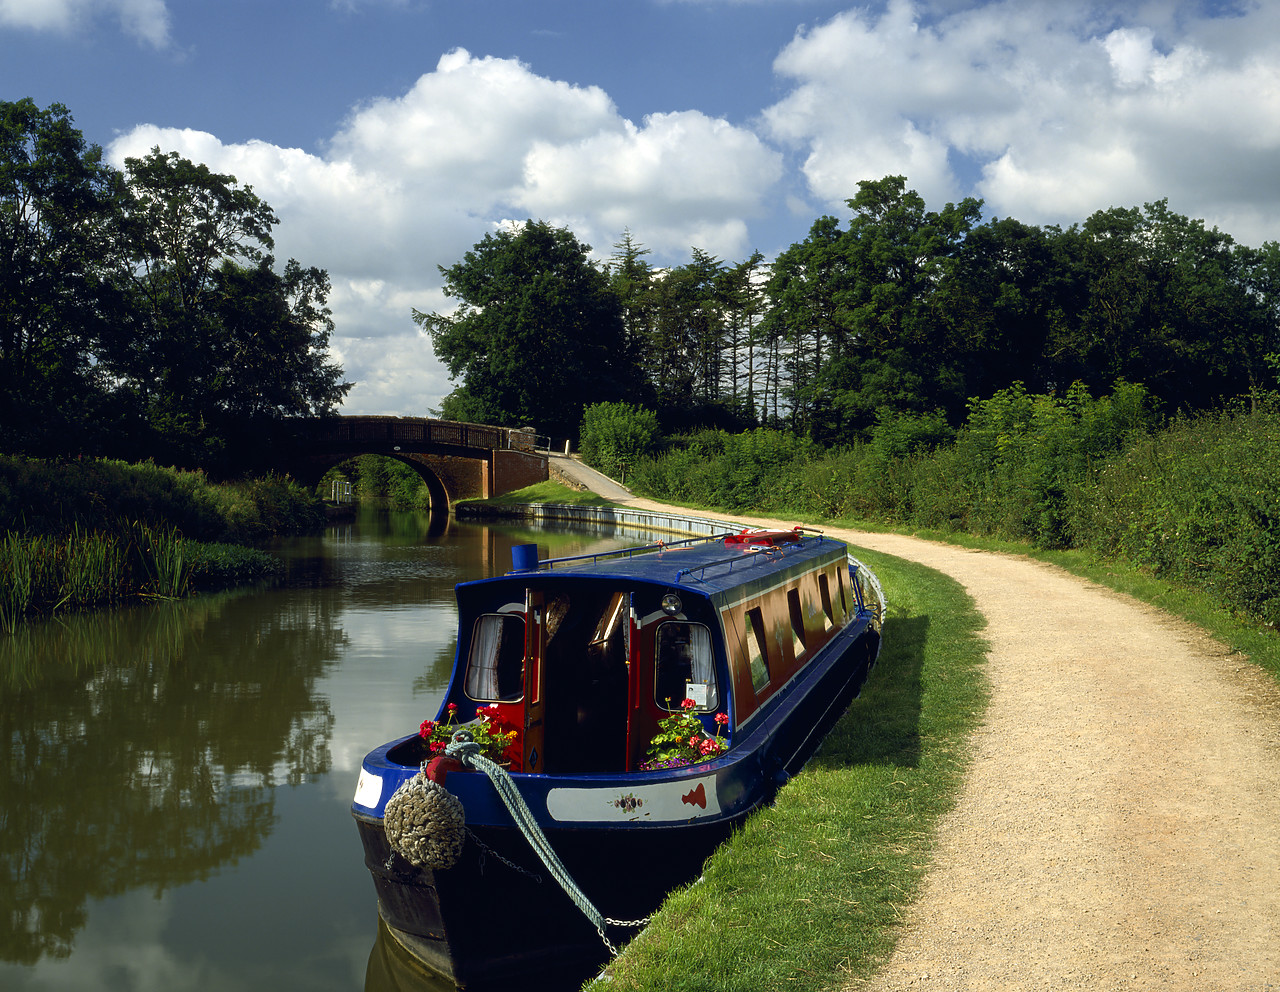 #924097-1 - Canal Boat on Grand Union Canal, Foxton, Leicestershire, England